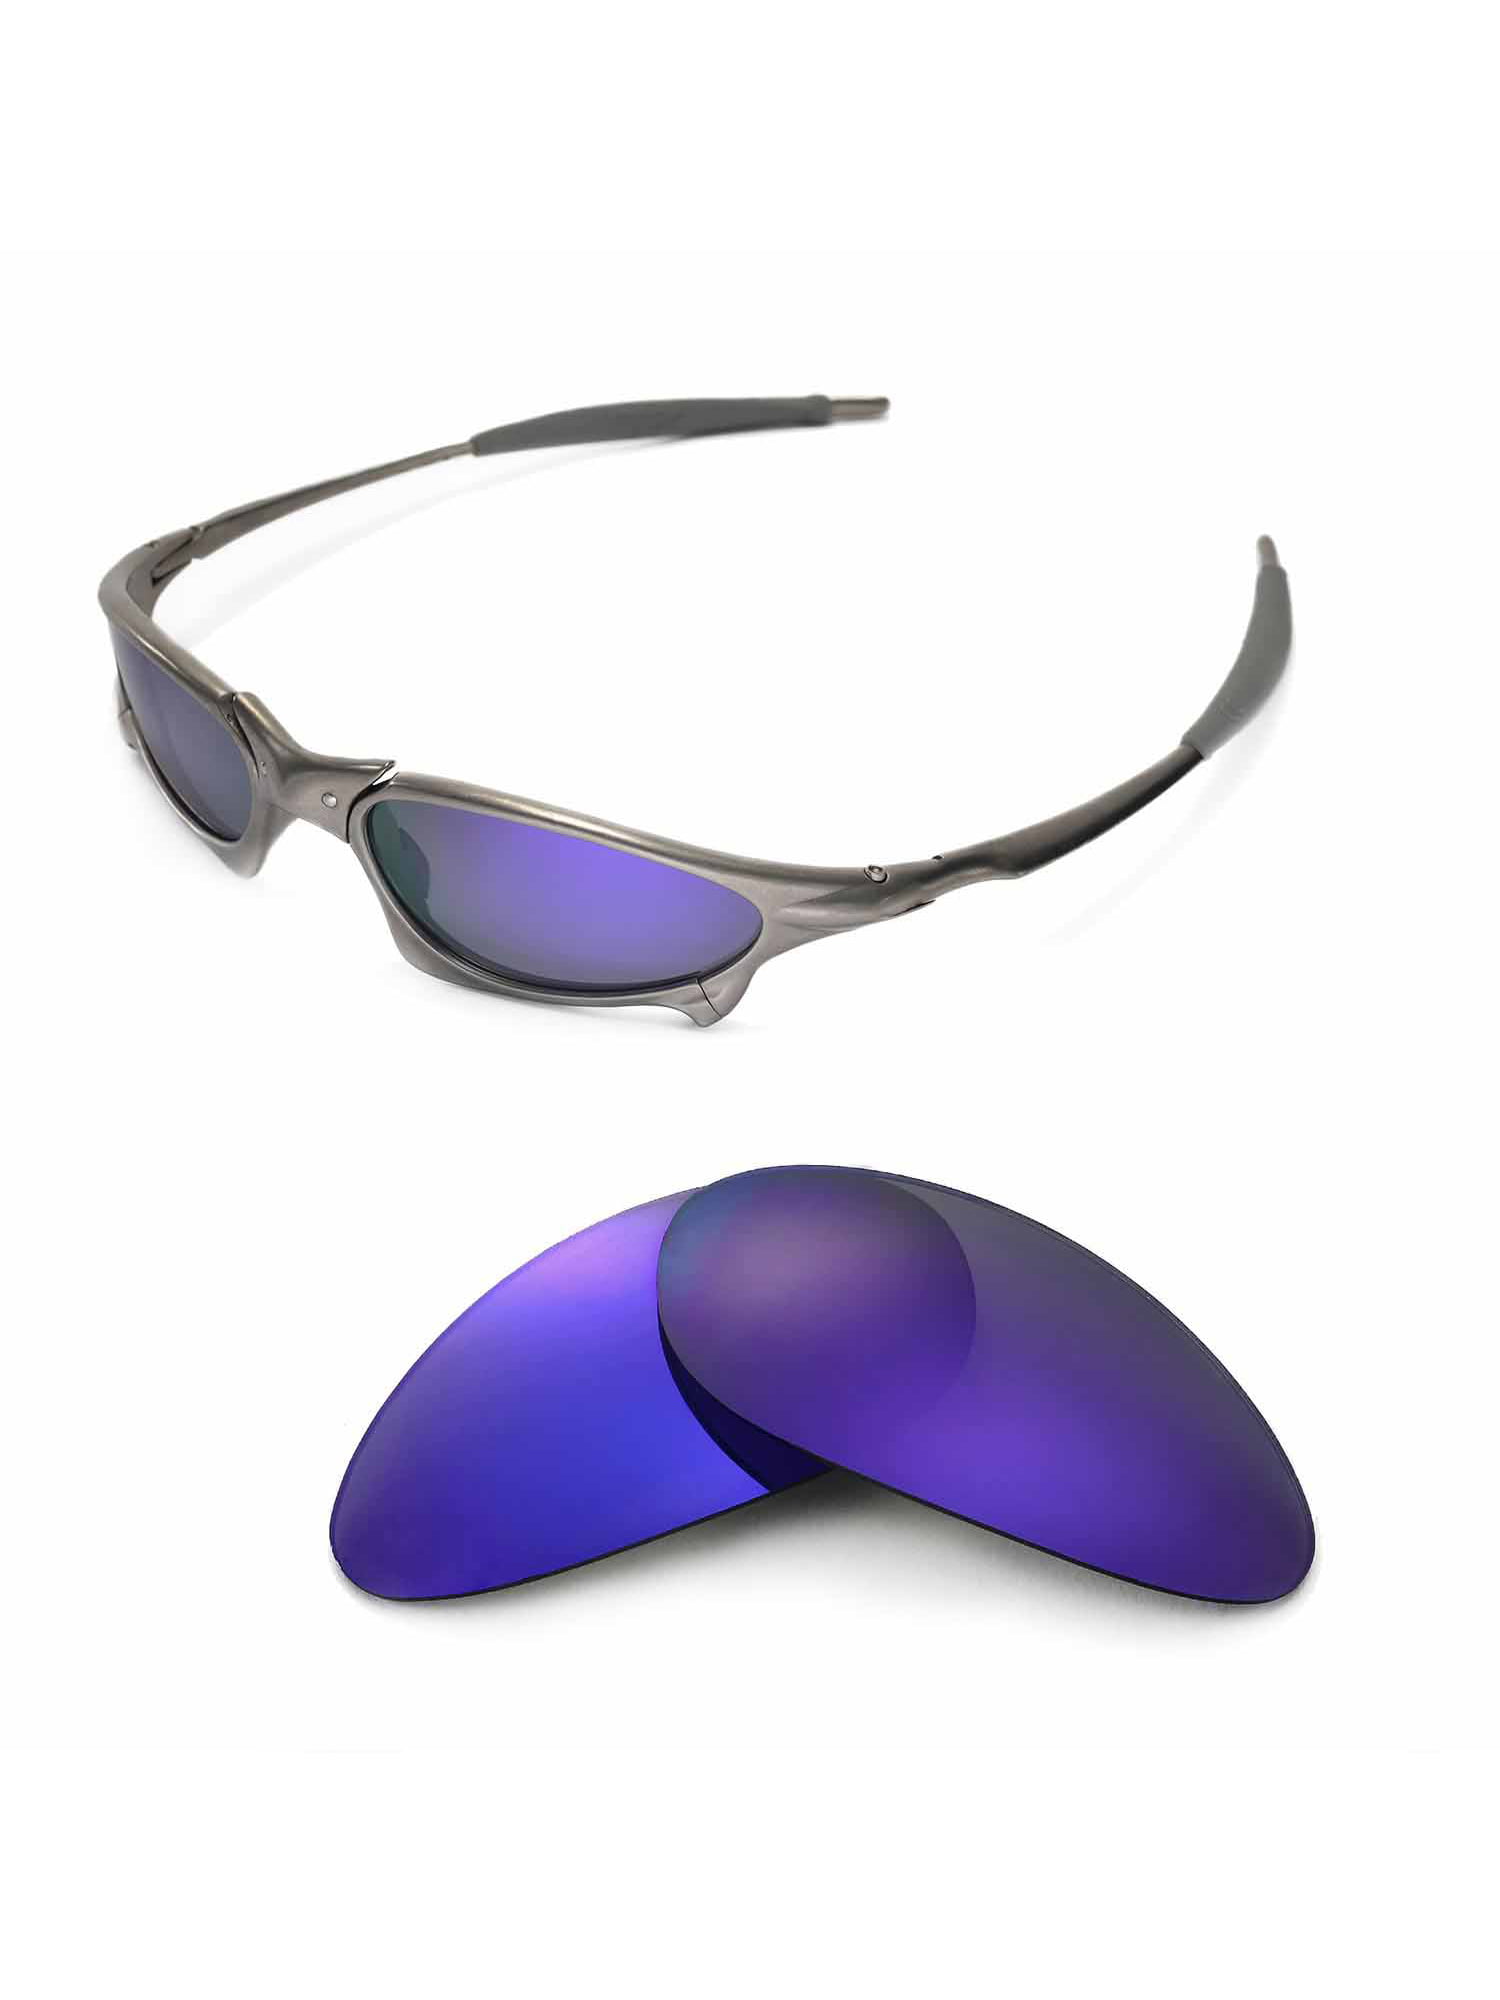 New Gray Polar w/Purple Mirror Replacement Lenses made to fit Oakley Juliet  X-M